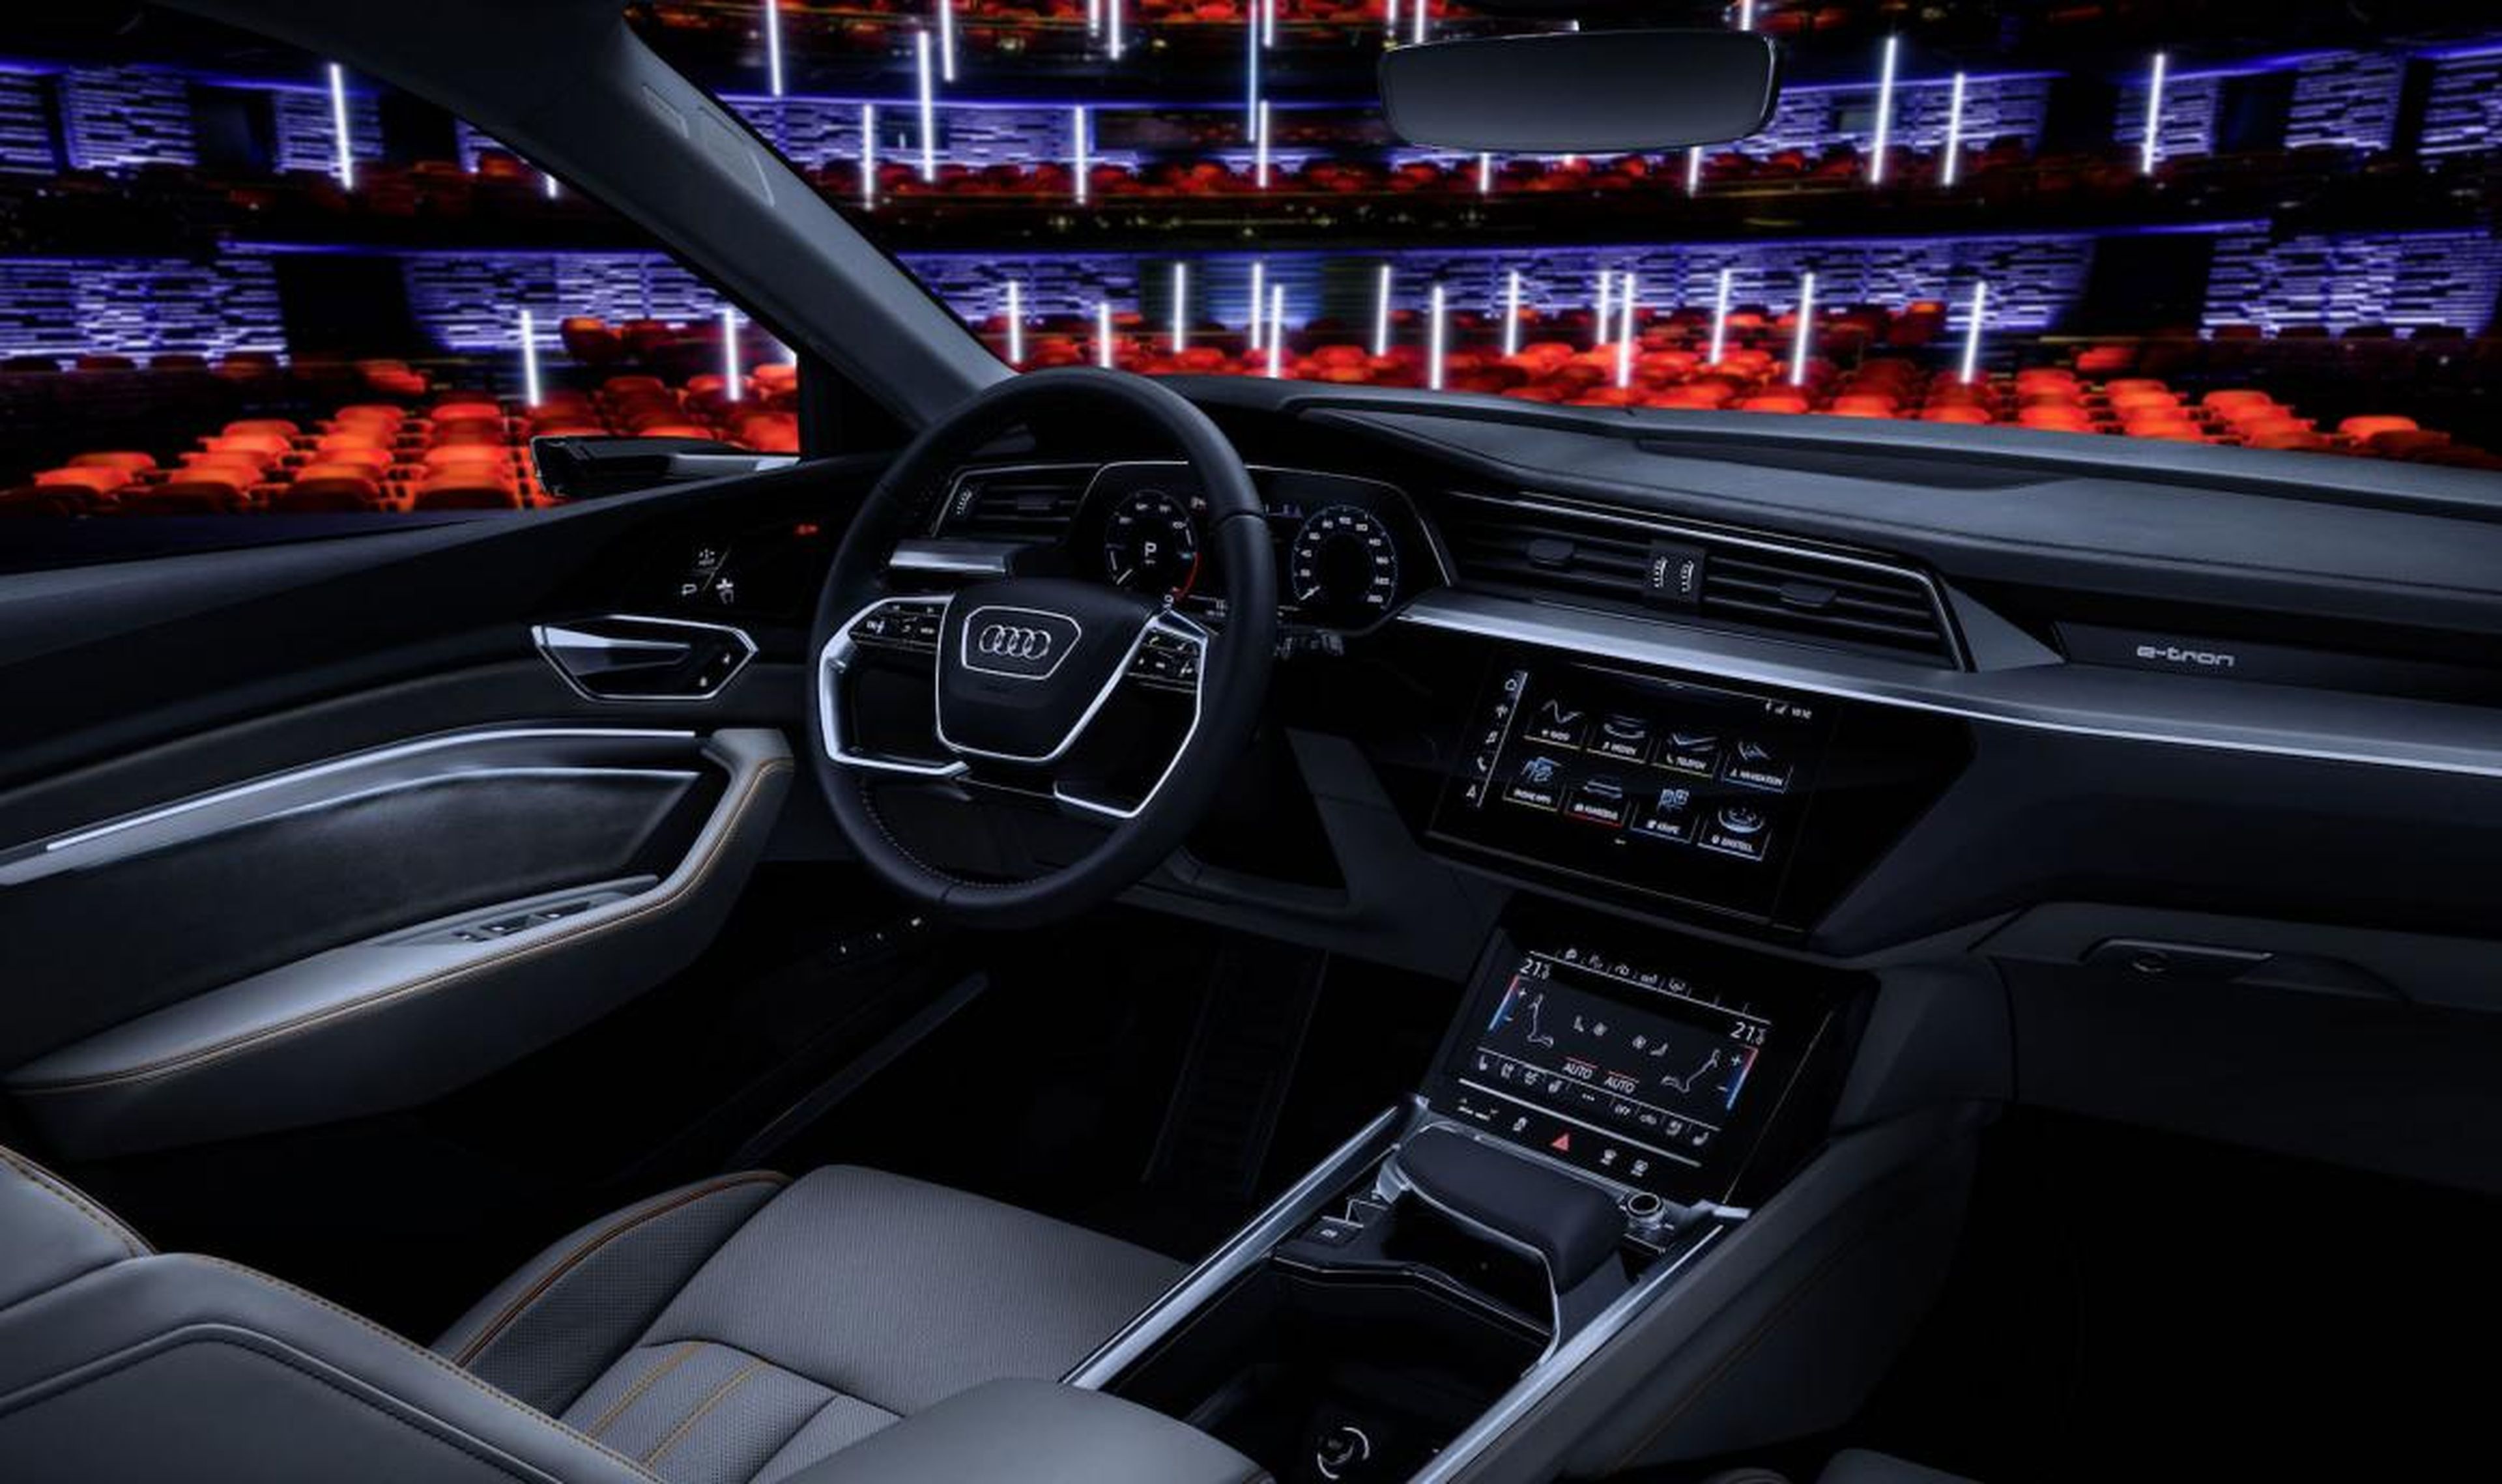 Audi's 2020 E-Tron cabin will combine luxury with technology.